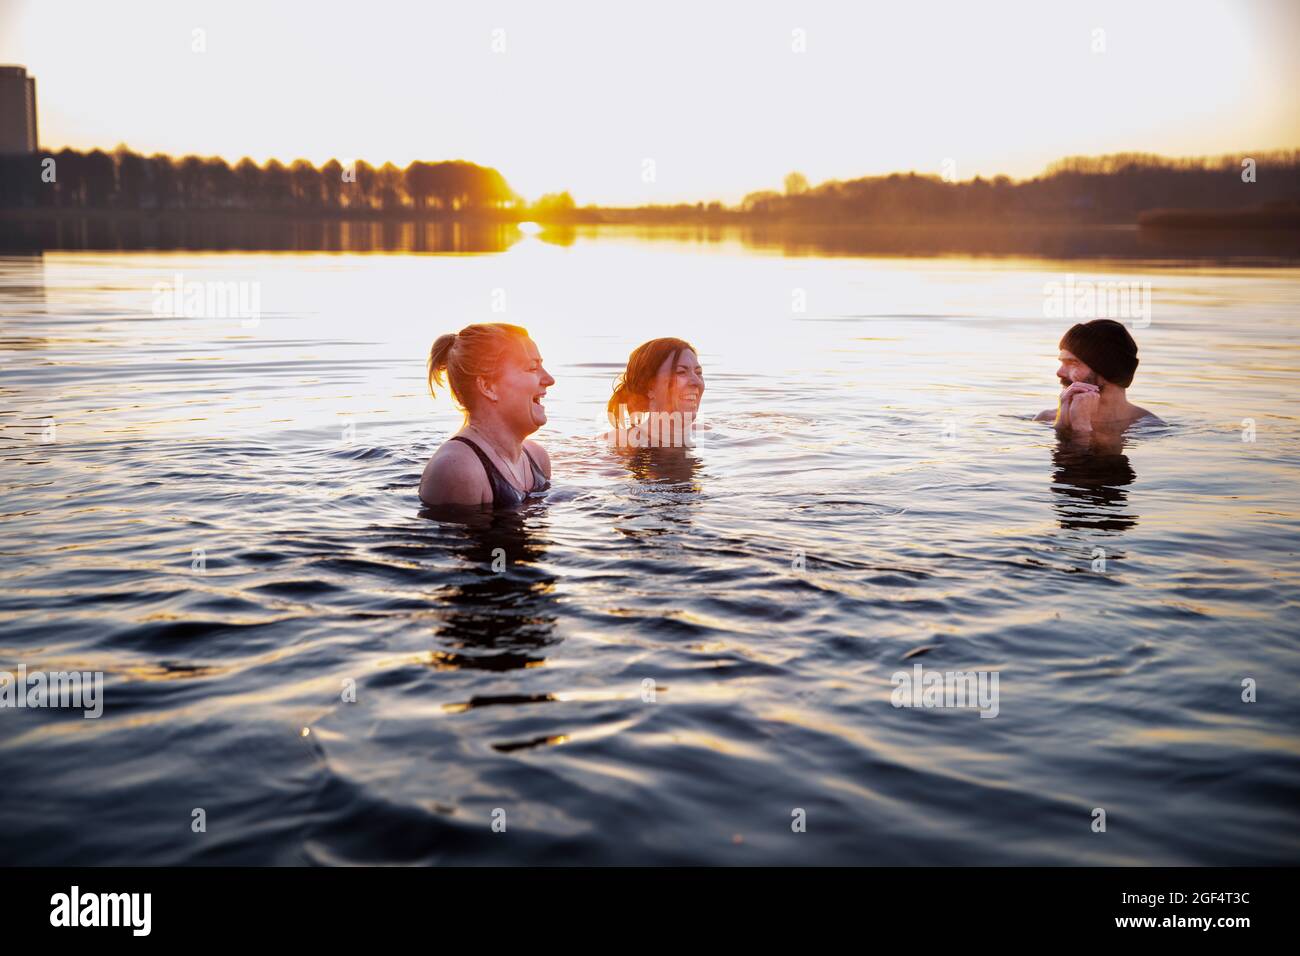 Cheerful women enjoying in water while looking at male friend Stock Photo